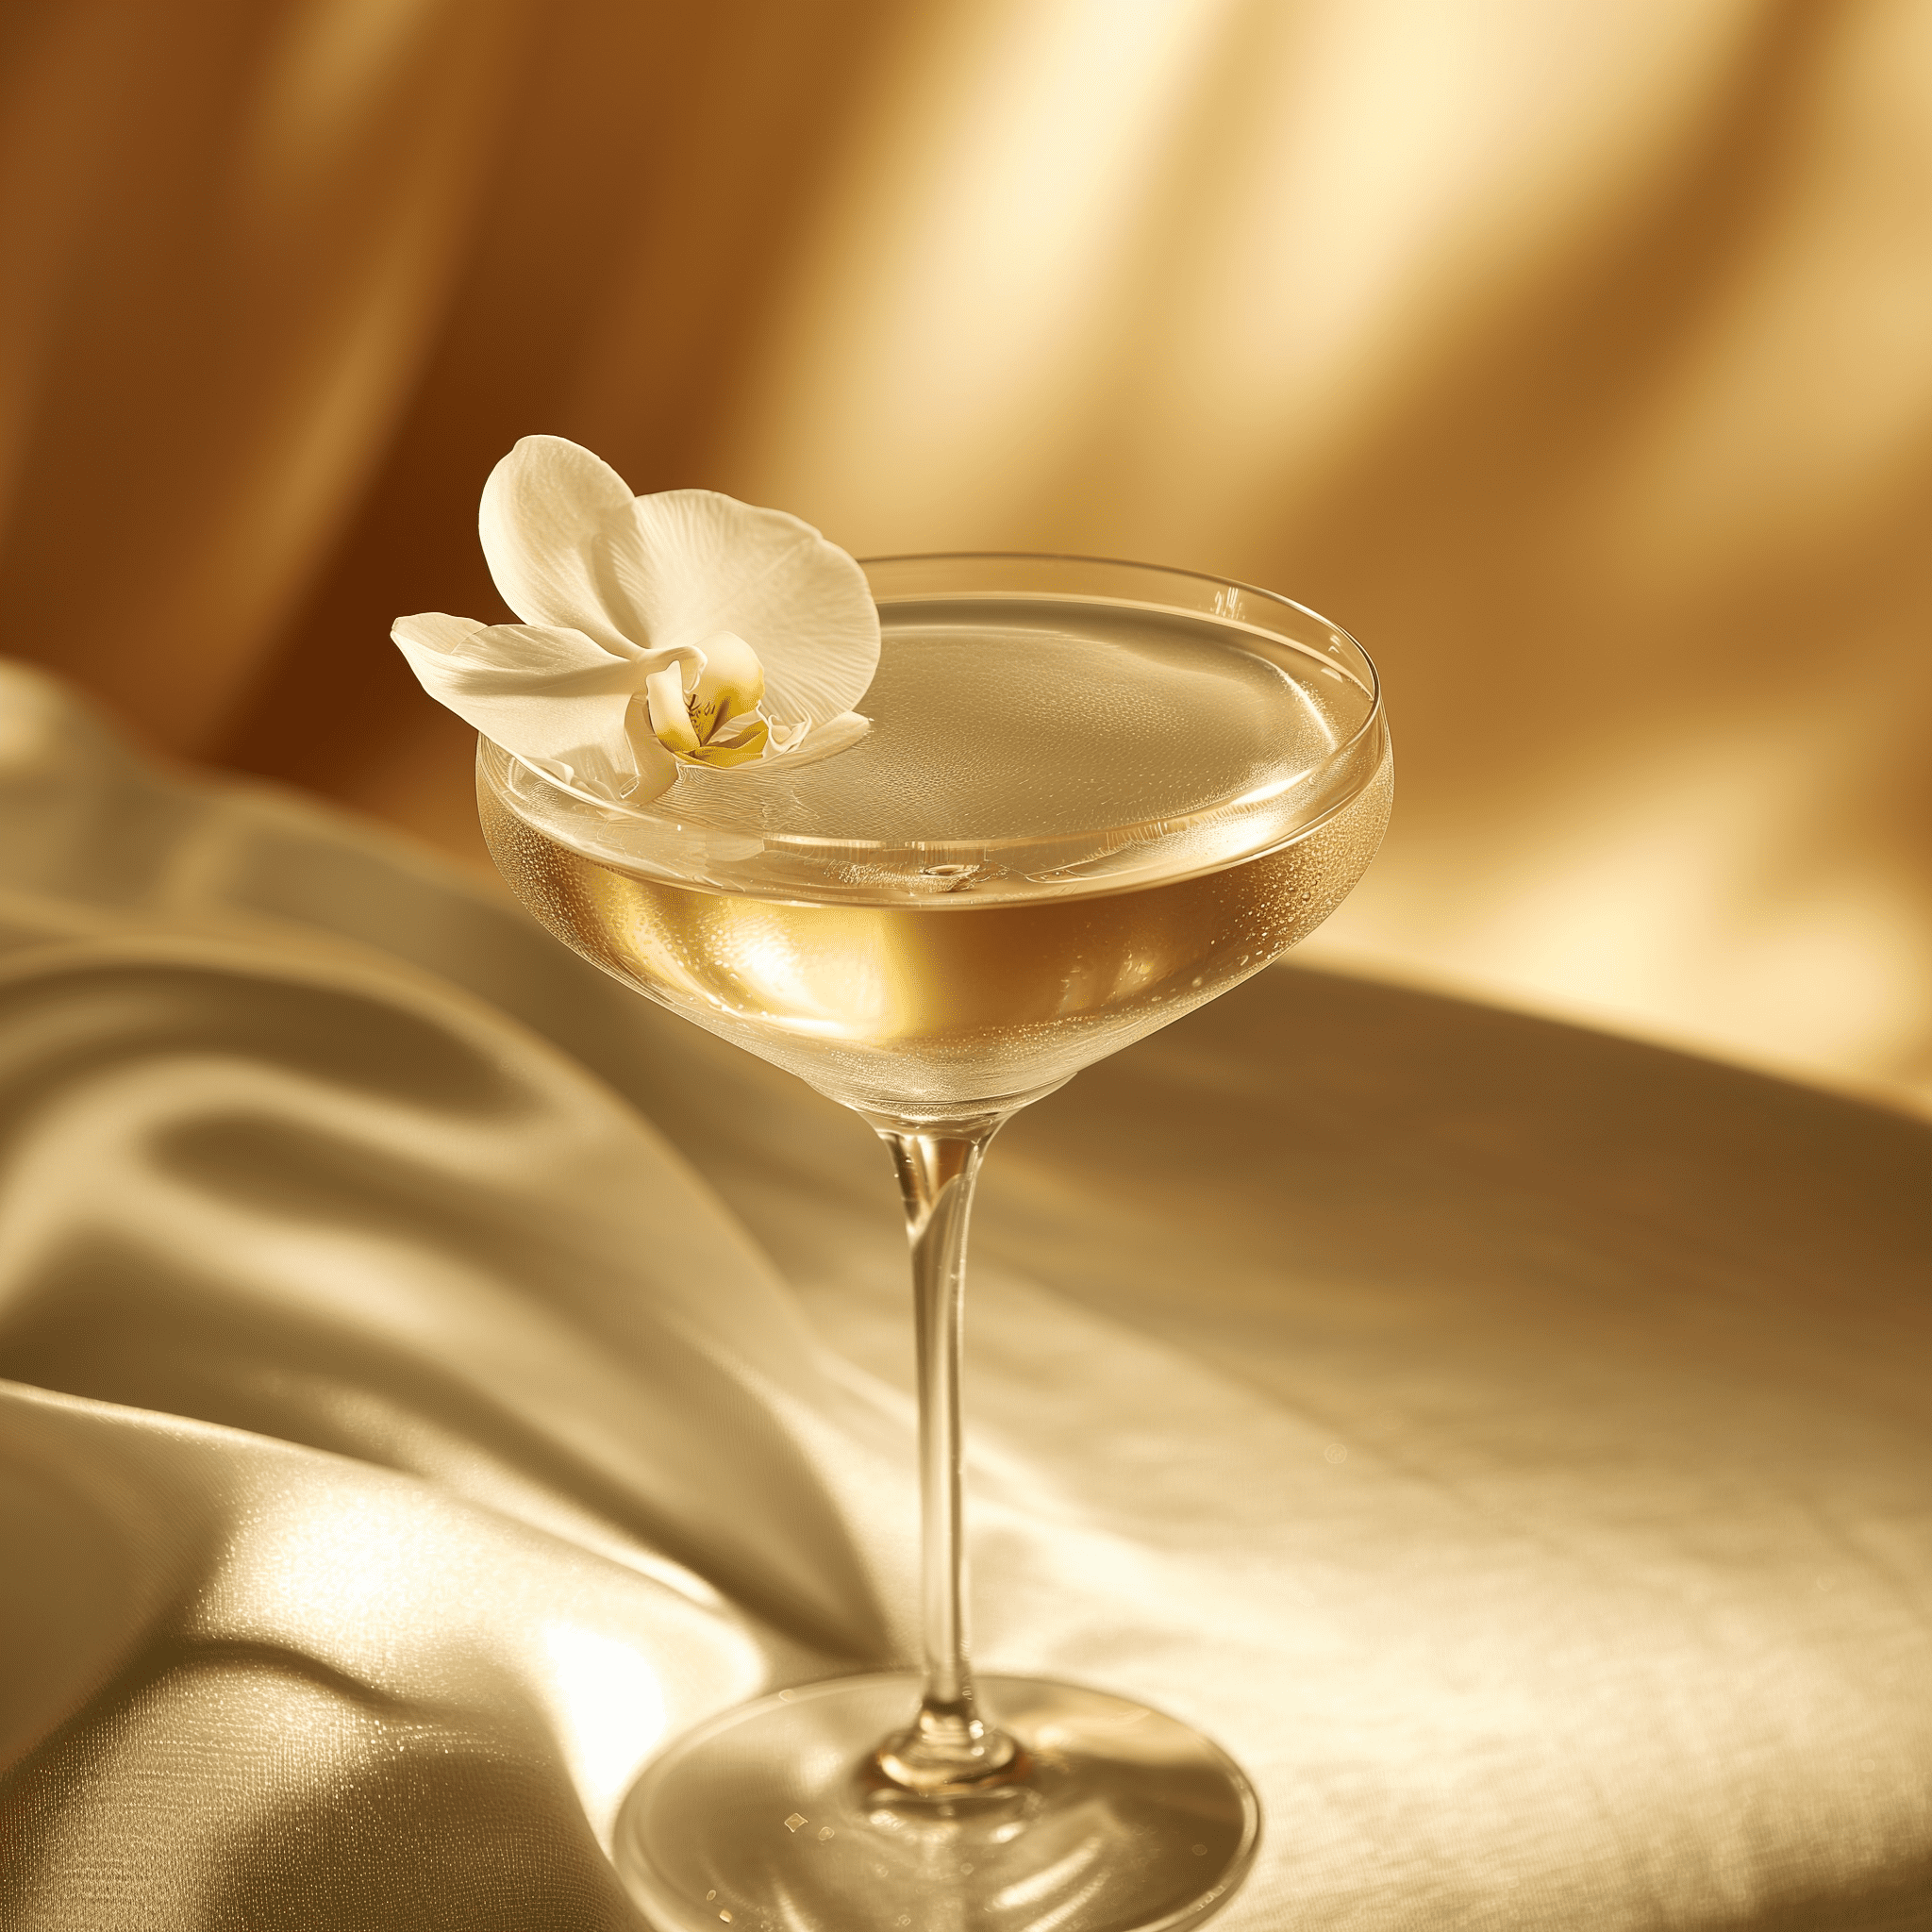 Coco Chanel Cocktail Recipe - The Coco Chanel cocktail is a delightful blend of sweet and floral notes with a creamy coconut backdrop. It's smooth, slightly exotic, and has a luxurious mouthfeel that's both refreshing and indulgent.